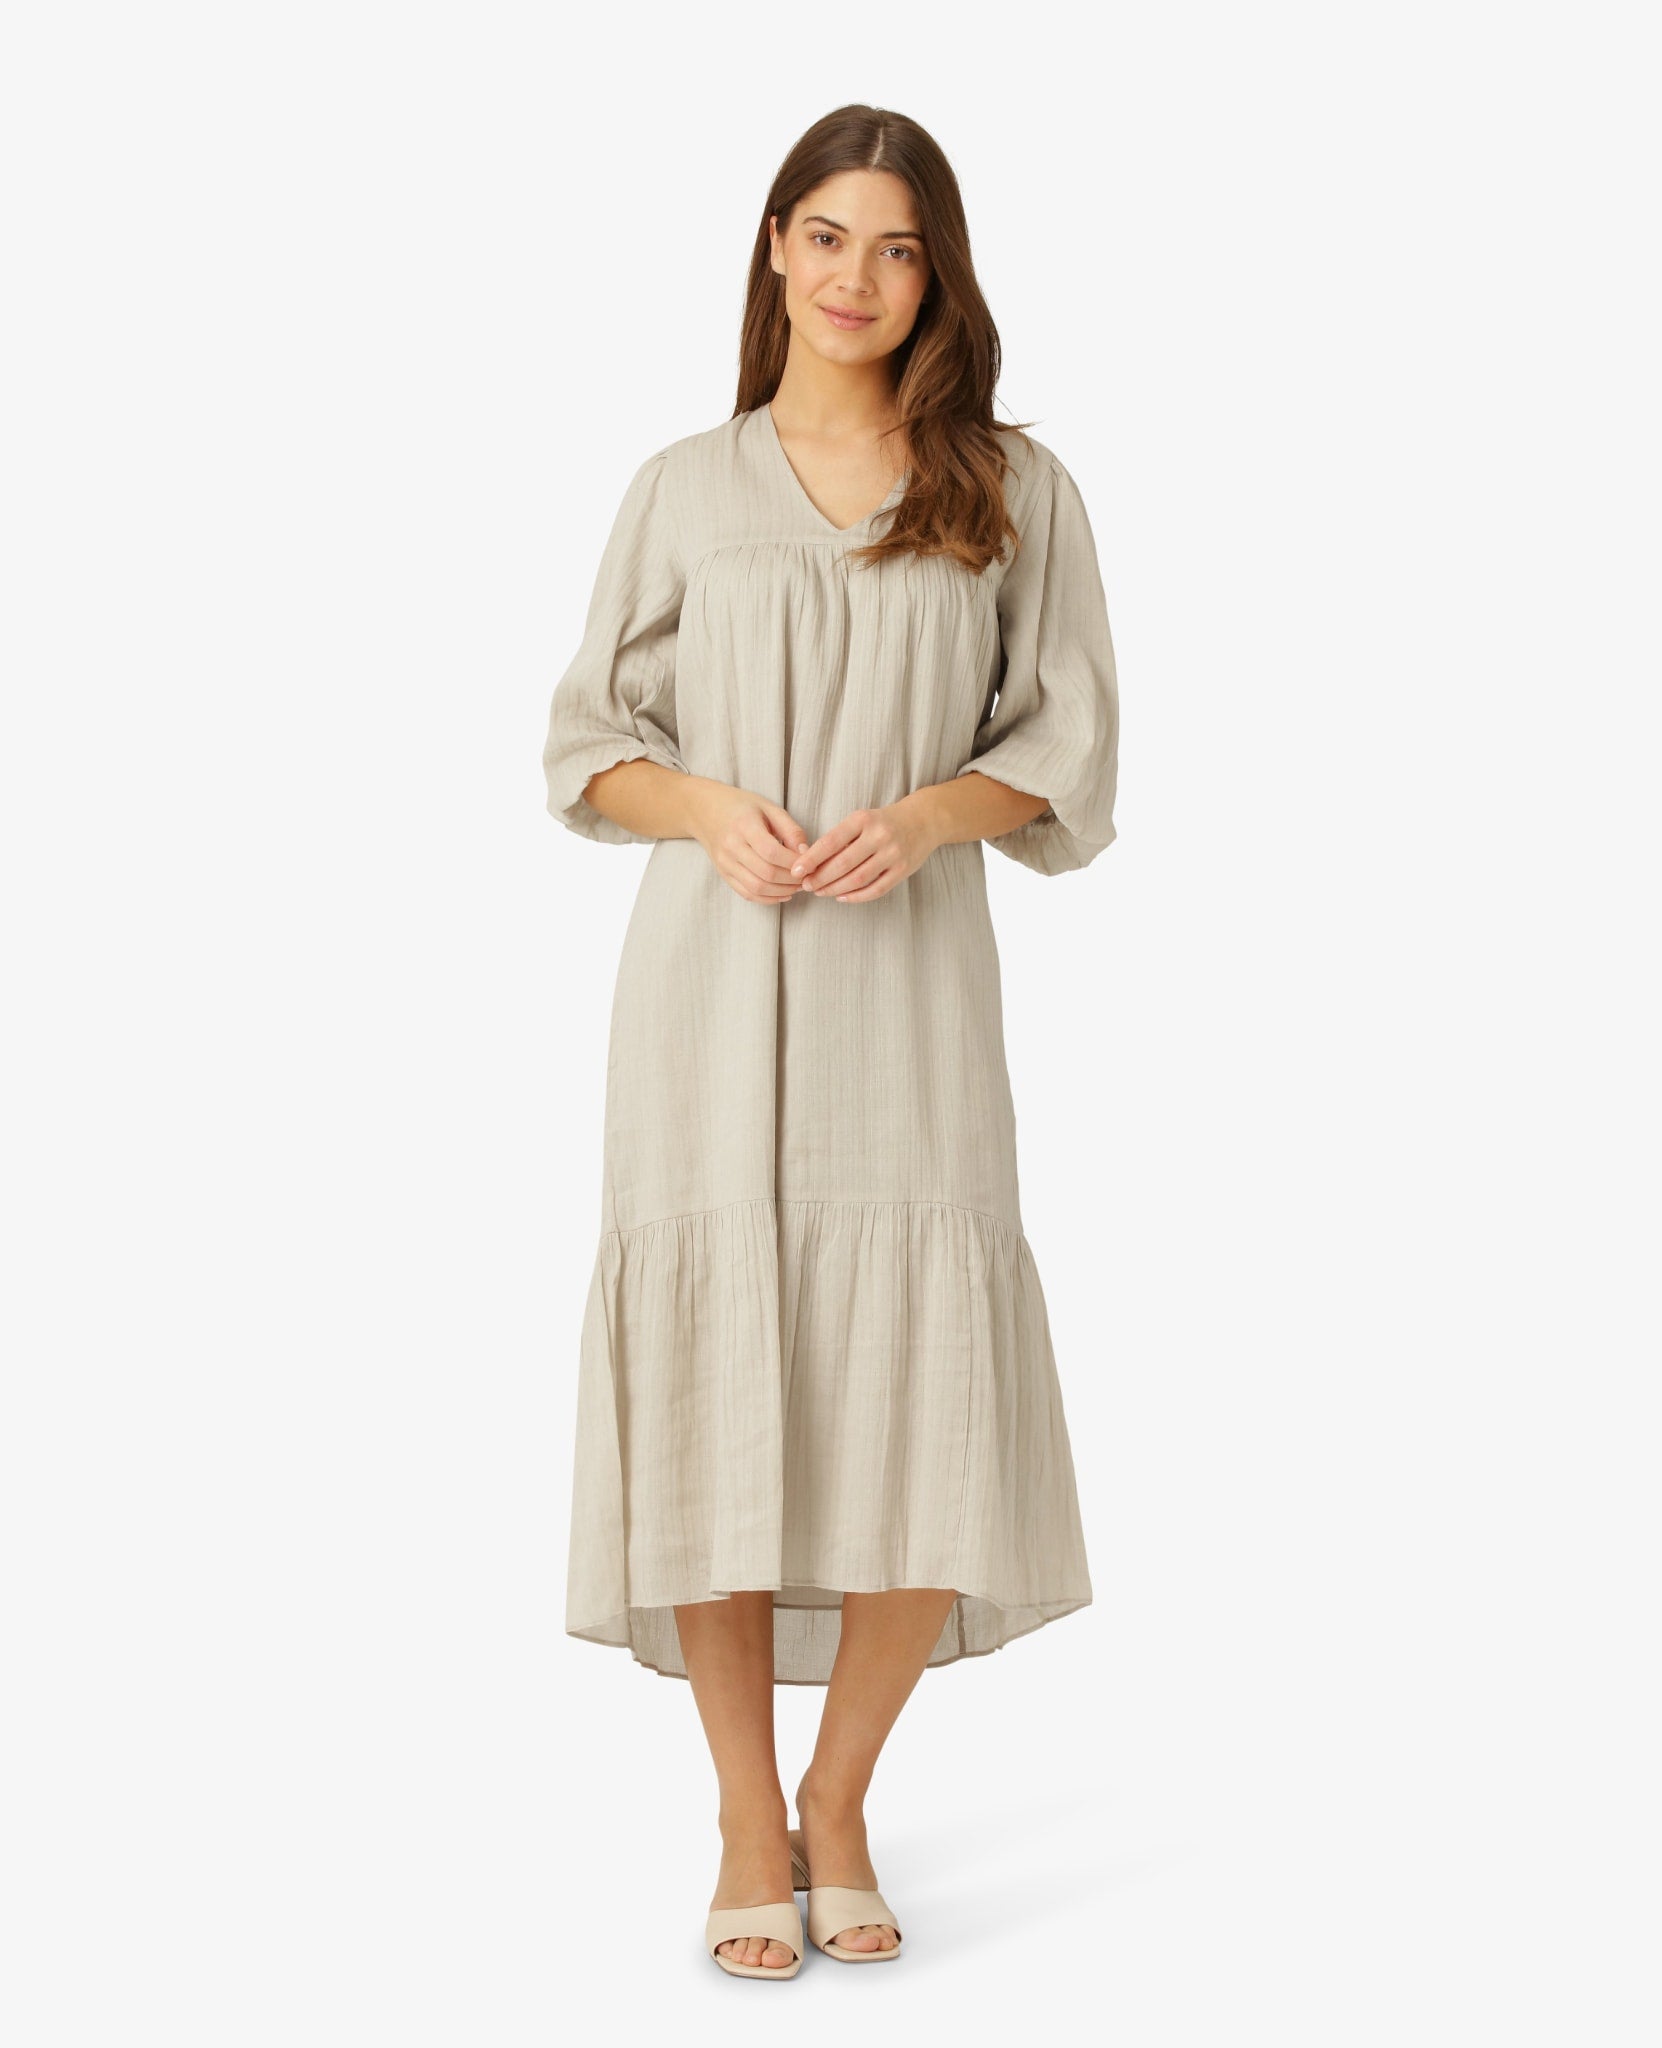 Why An Organic Cotton Gauze Dress Is A Must Have For Summer! - To